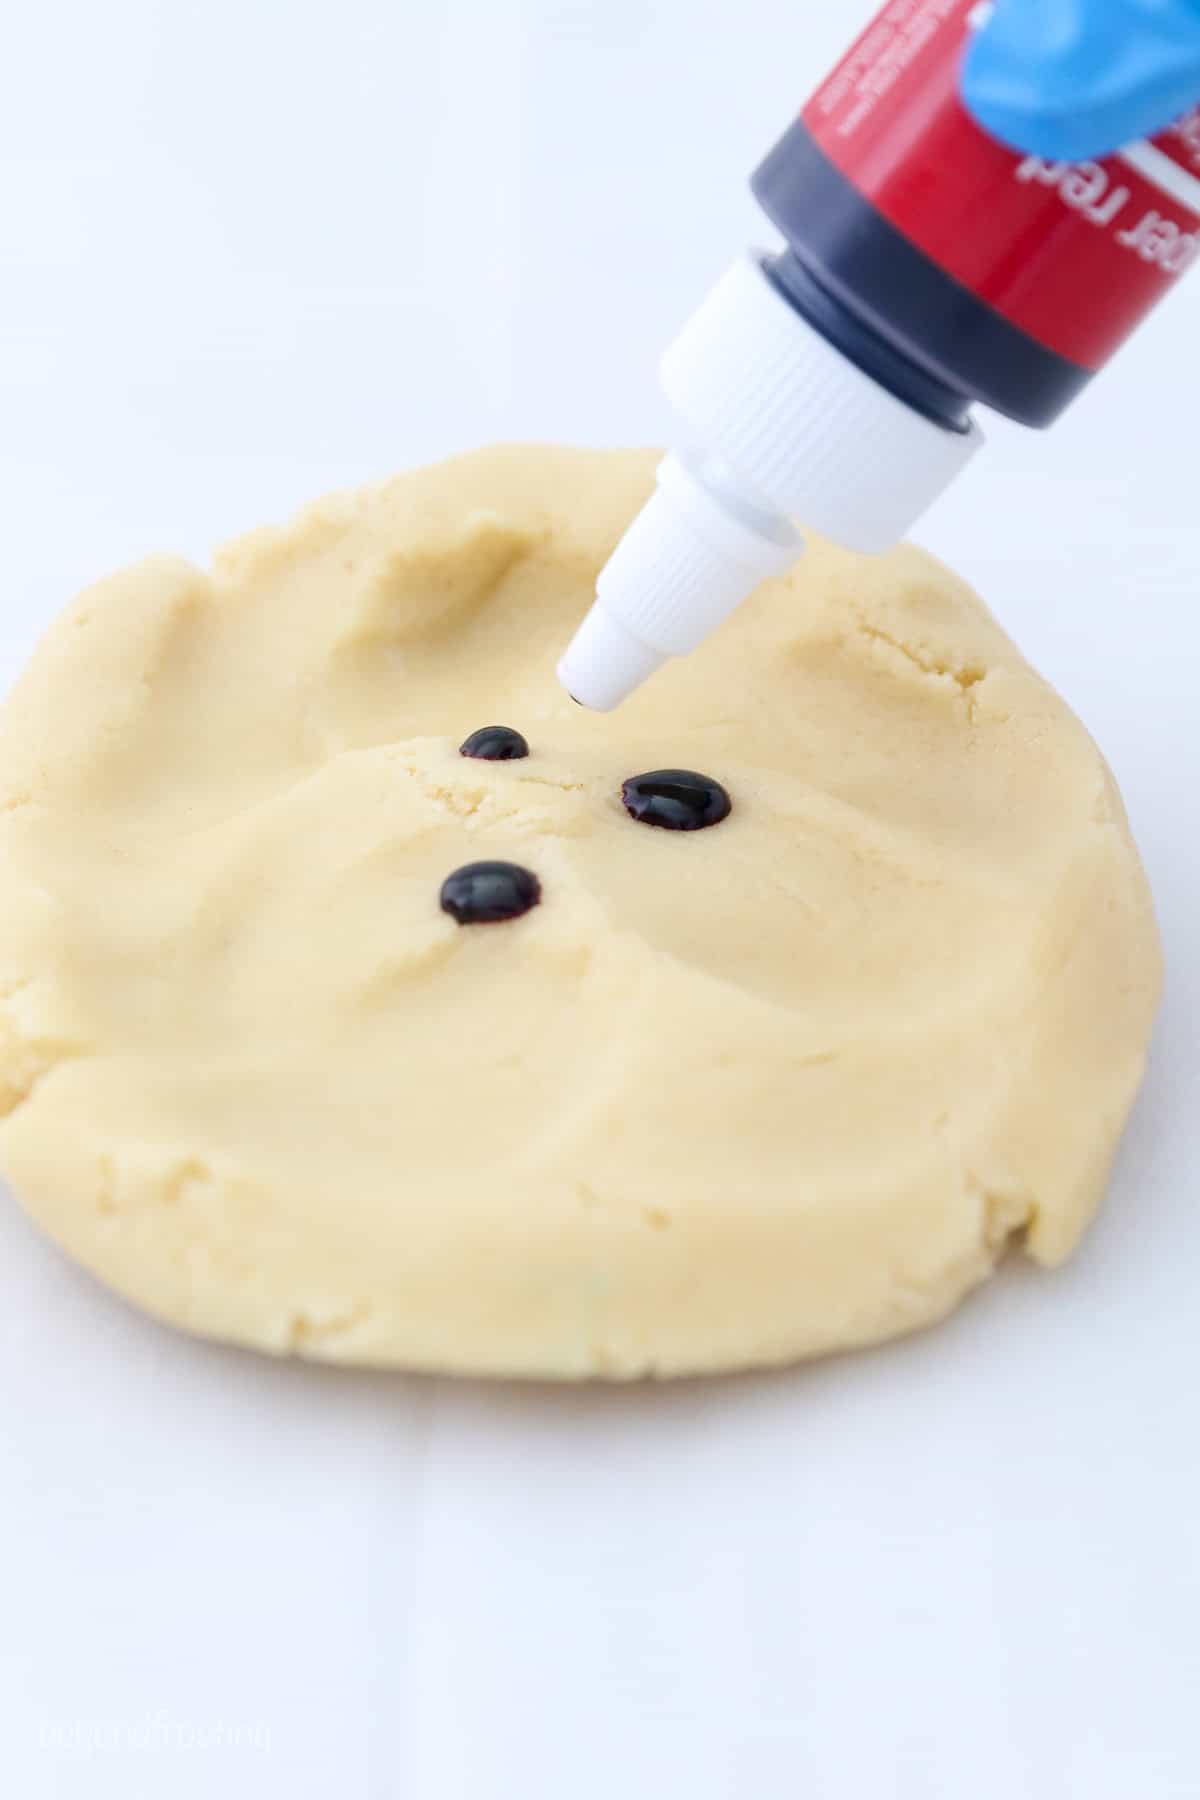 A bottle of blue food coloring adding drops to a piece of cookie dough.